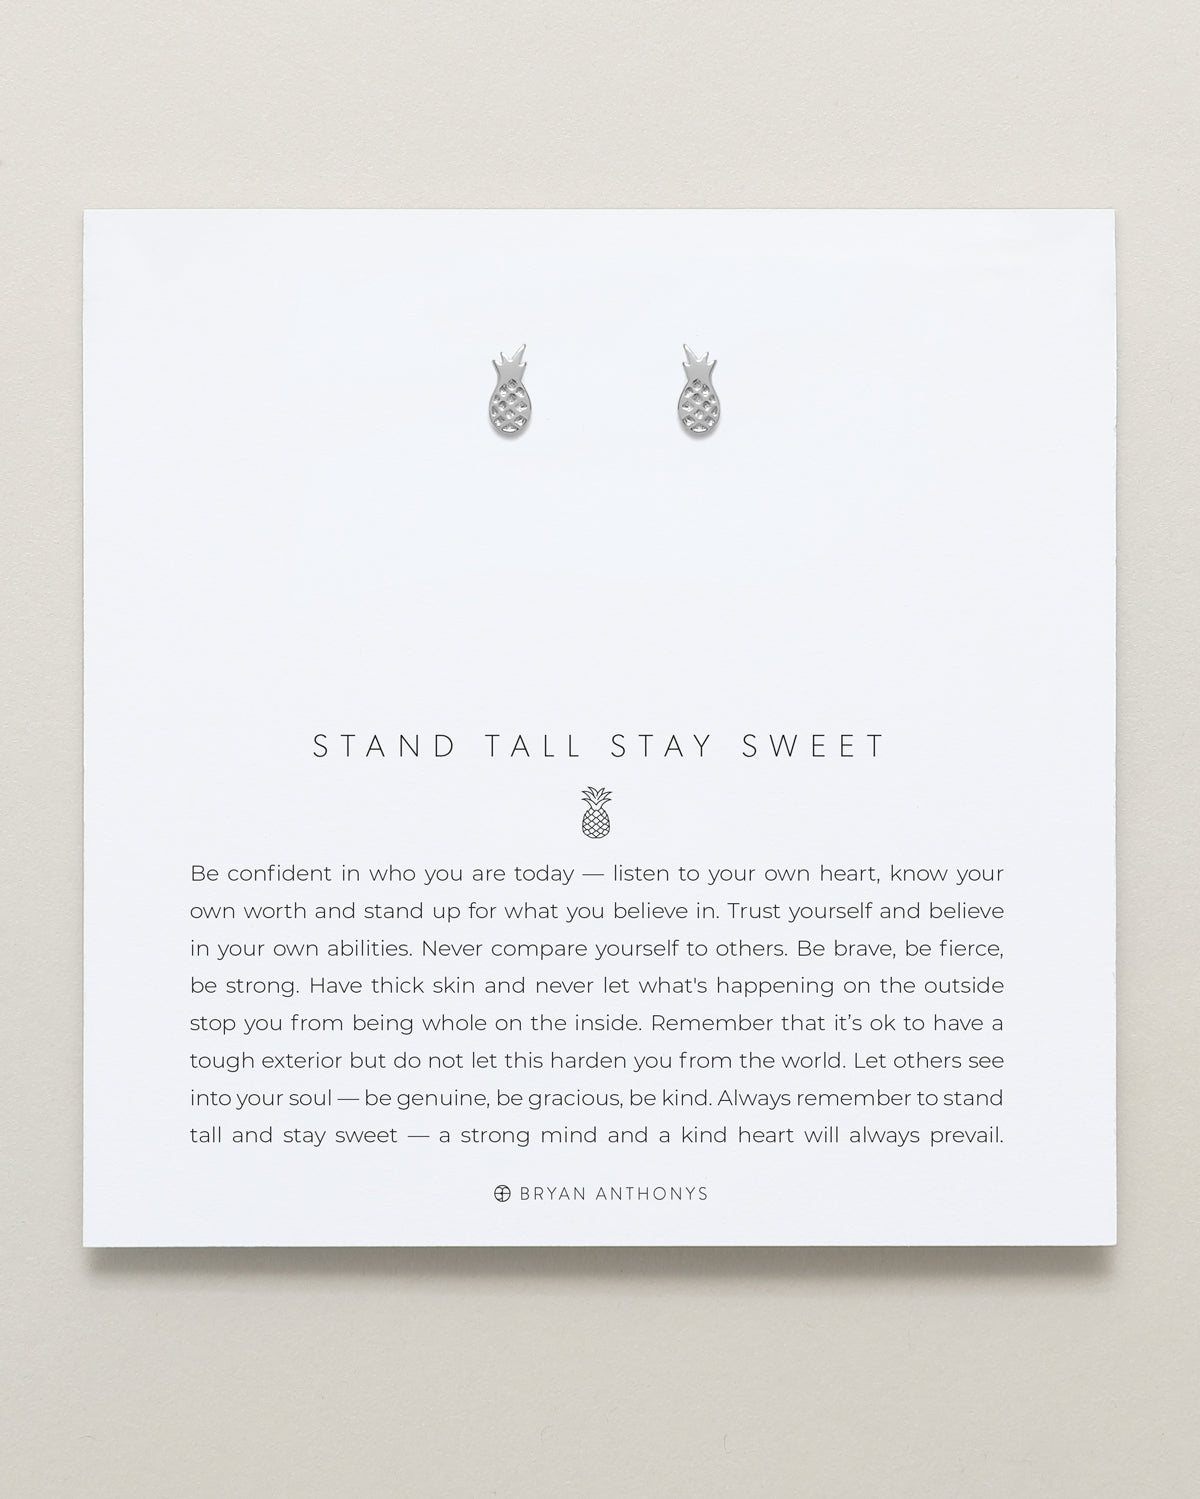 Bryan Anthonys Stand Tall Stay Sweet Silver Stud Earrings on card